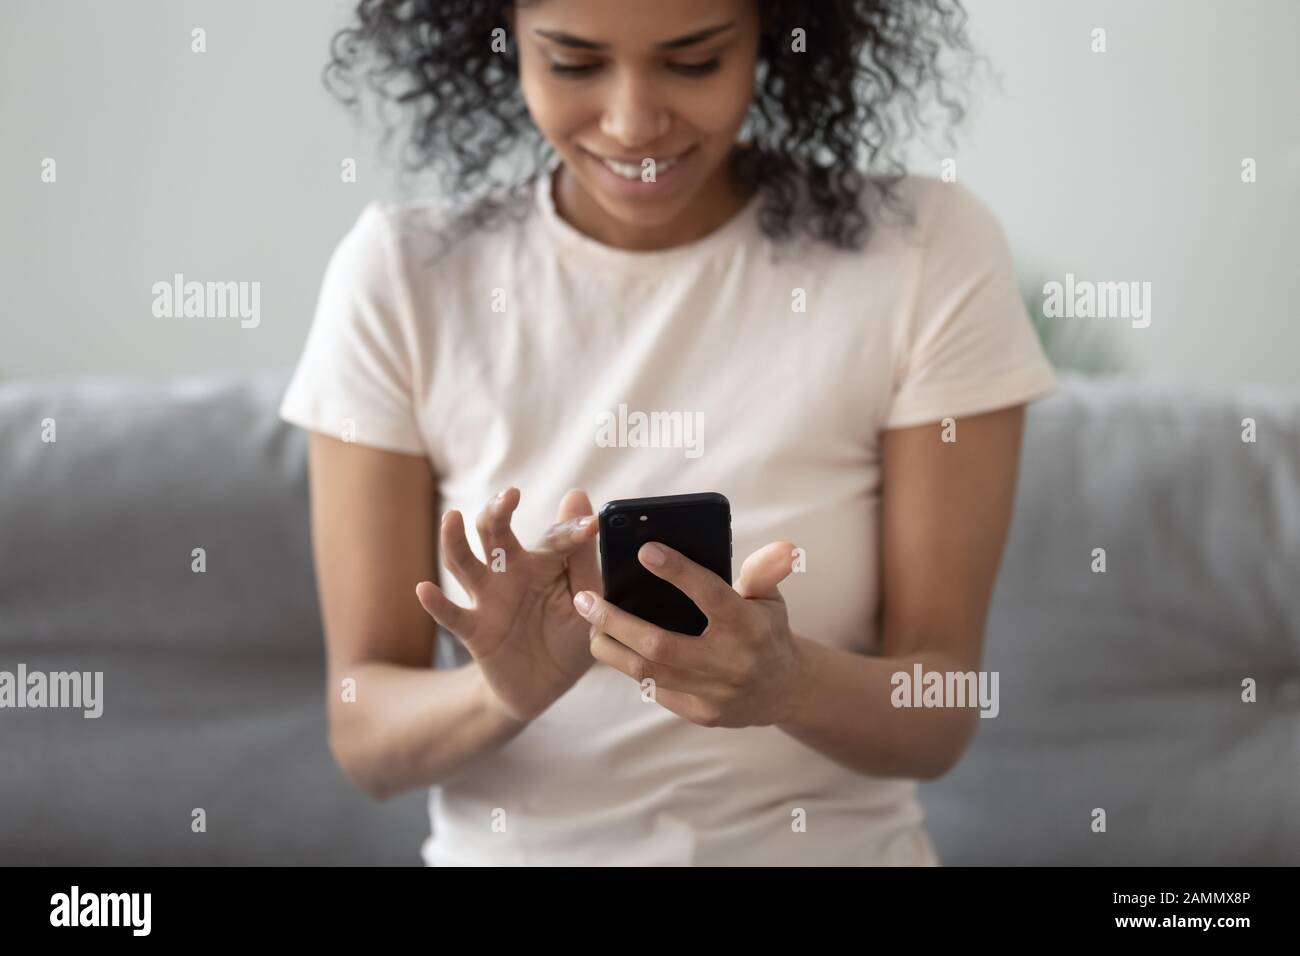 African woman holding smartphone closeup focus on hands and gadget Stock Photo